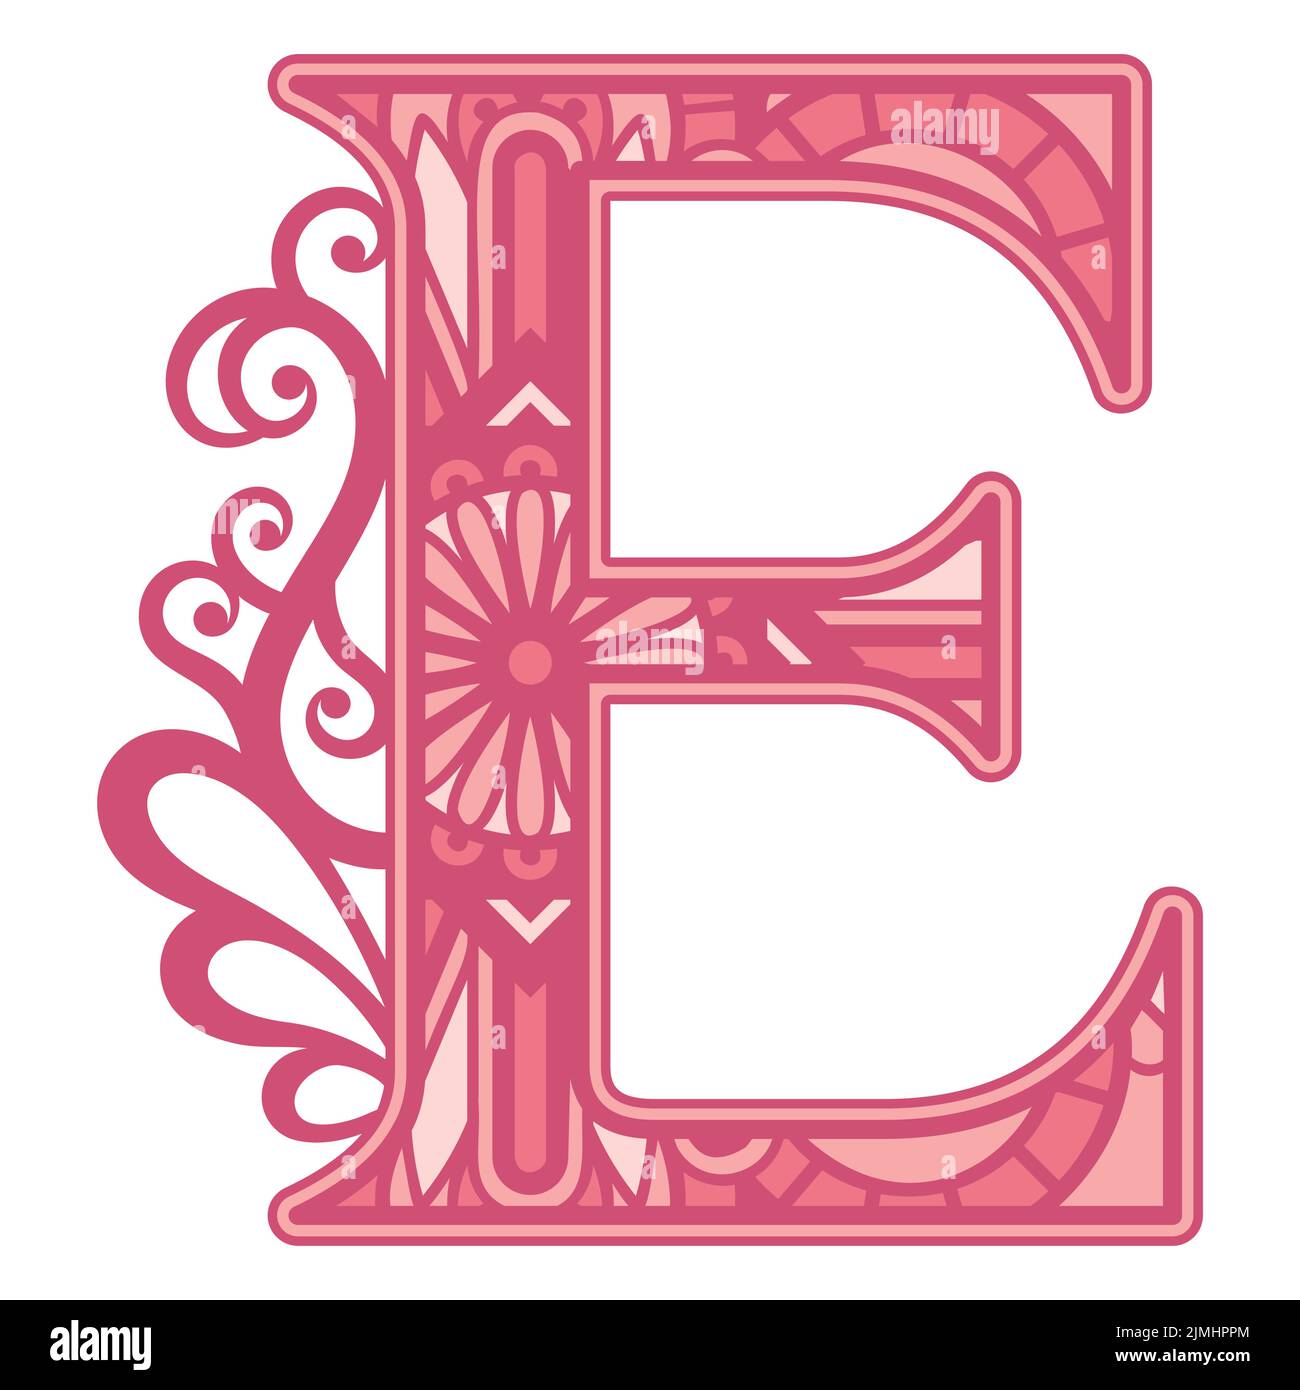 White Letter E on a Pink Background. Handwritten Script of the